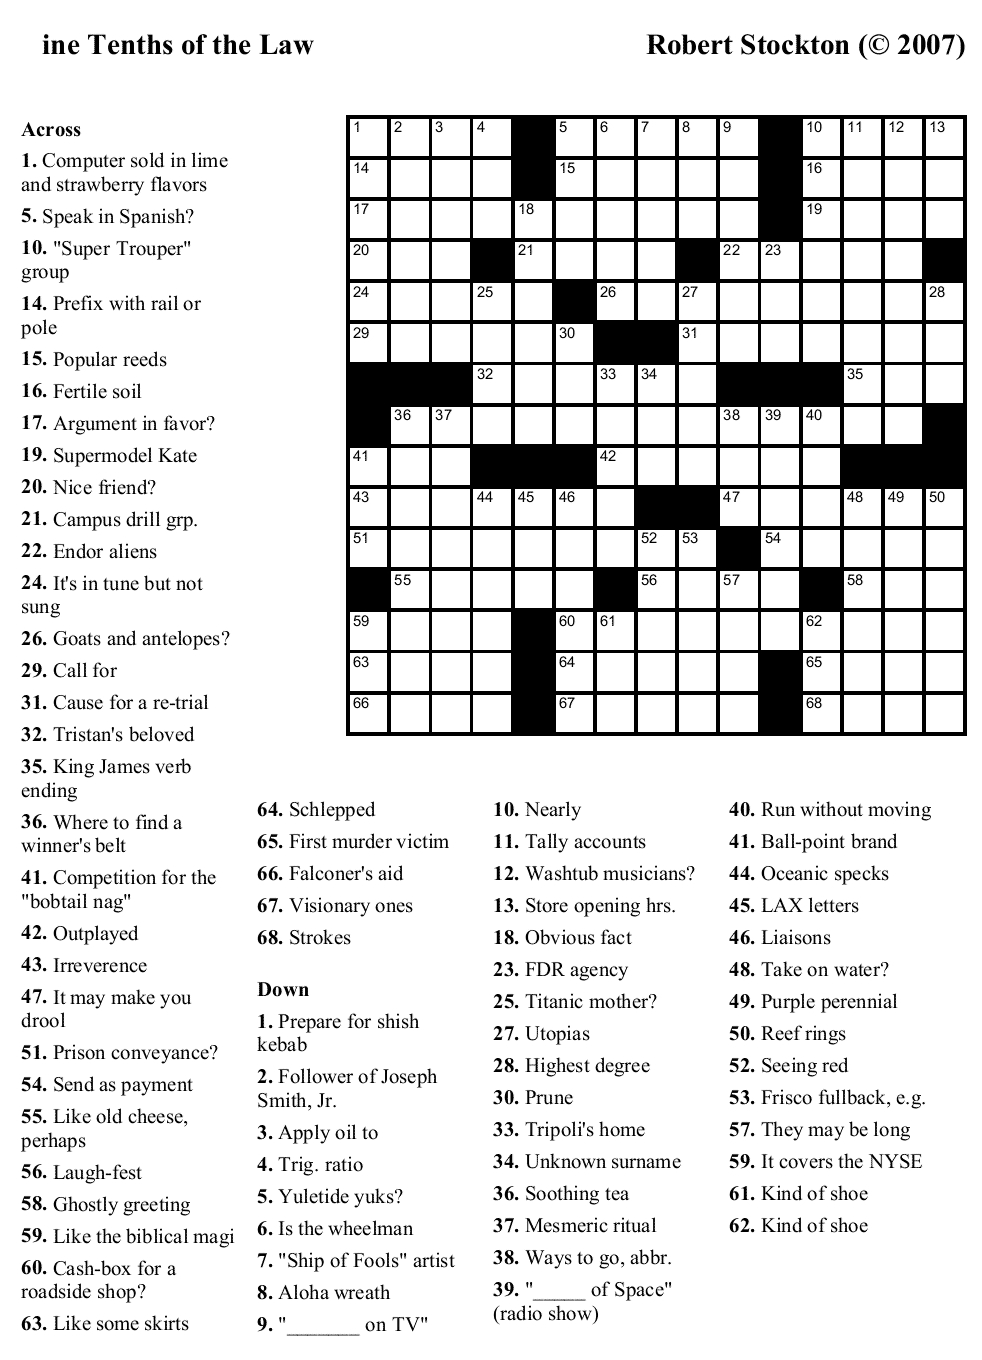 Crossword Puzzles Printable - Yahoo Image Search Results | Crossword - Printable Crossword Search